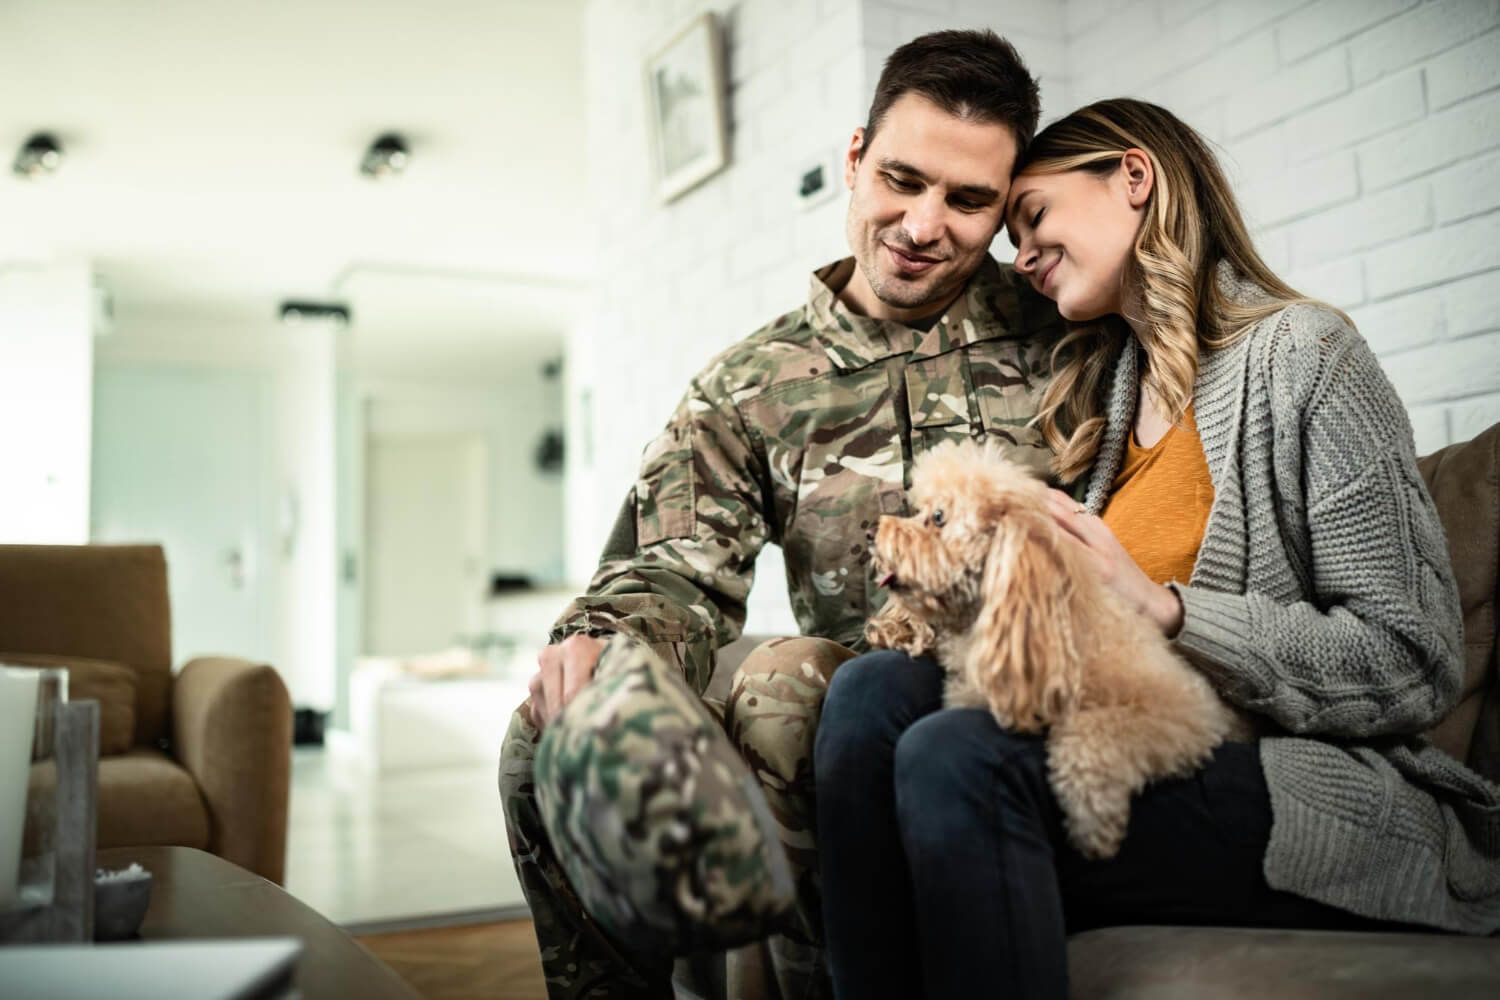 What You Need To Know About A VA Loan